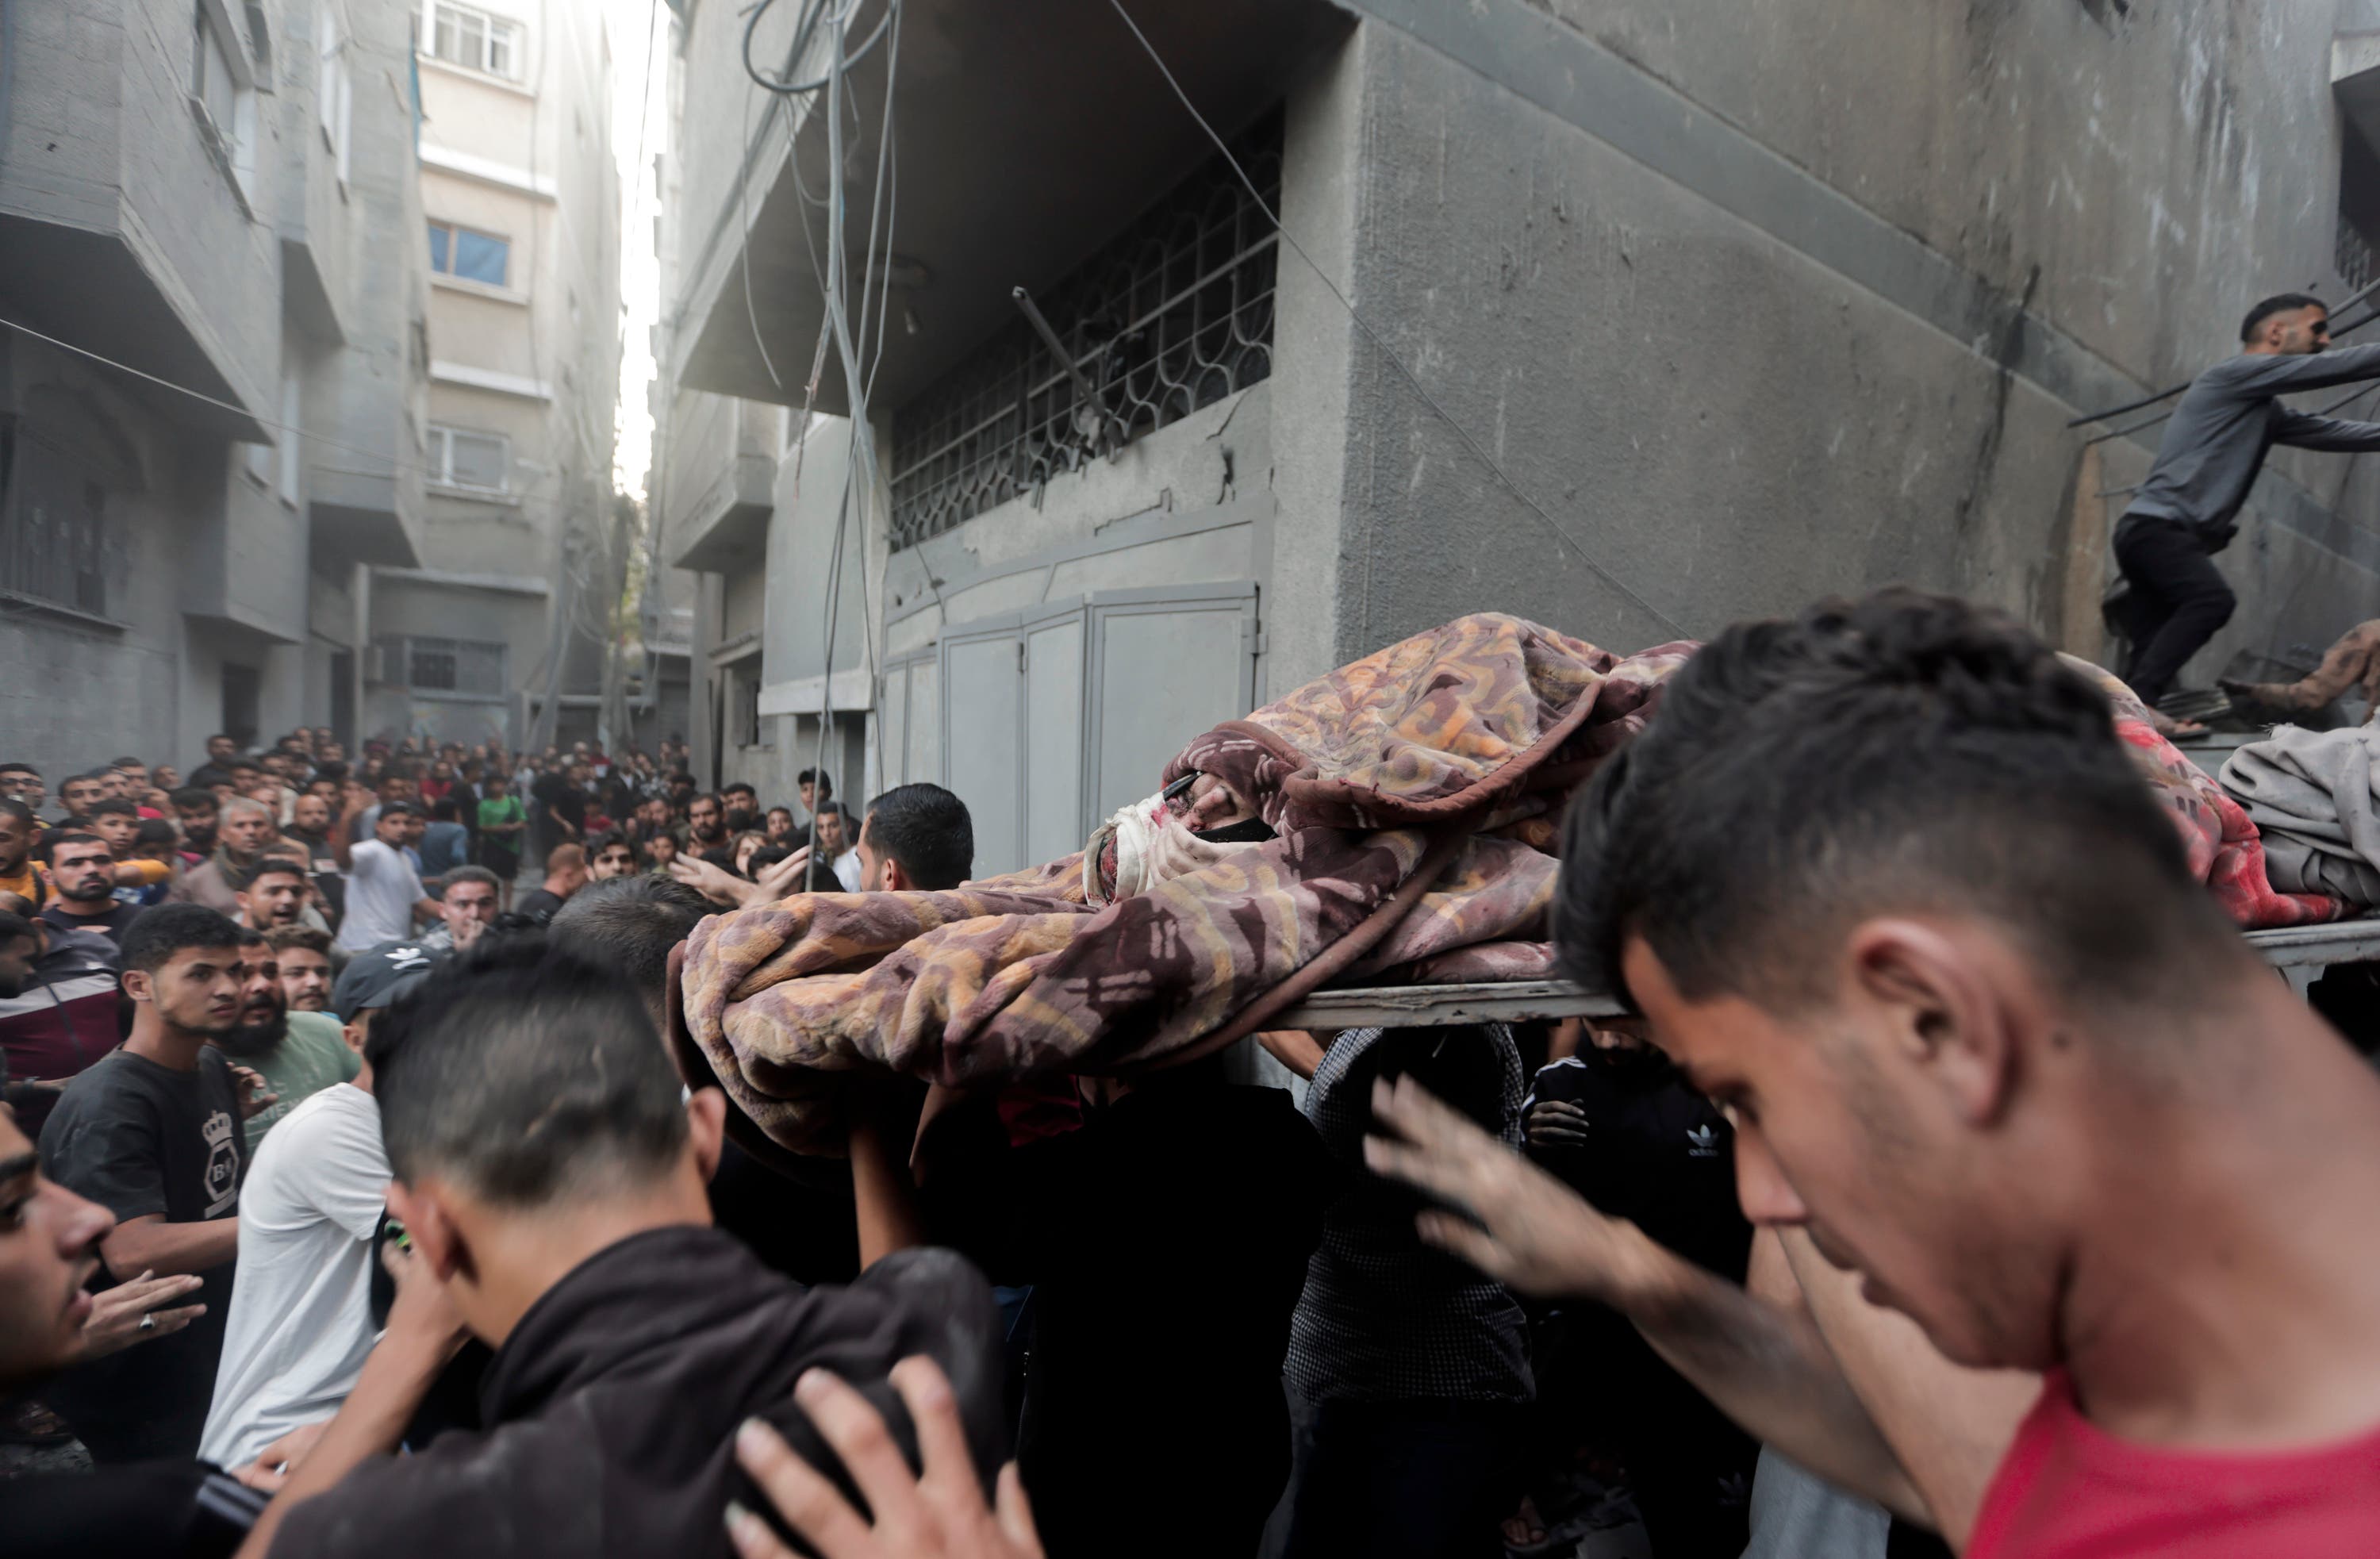 Palestinians evacuate an injured woman found under the rubble of a destroyed house after an Israeli airstrike in Khan Younis refugee camp, southern Gaza Strip, on Saturday.